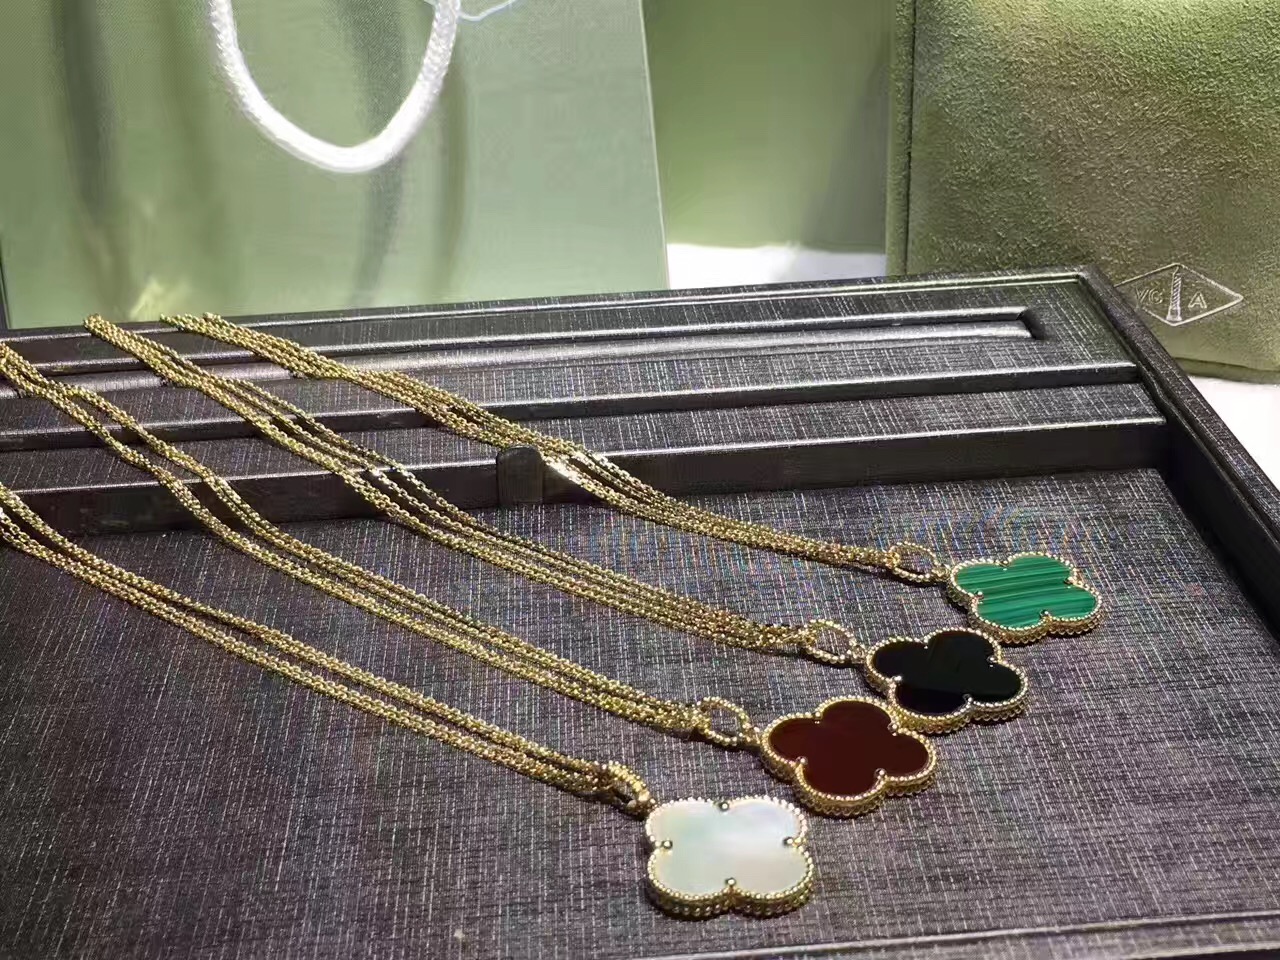 Van Cleef & Arpels updates the Magic Alhambra with new stones and finishes